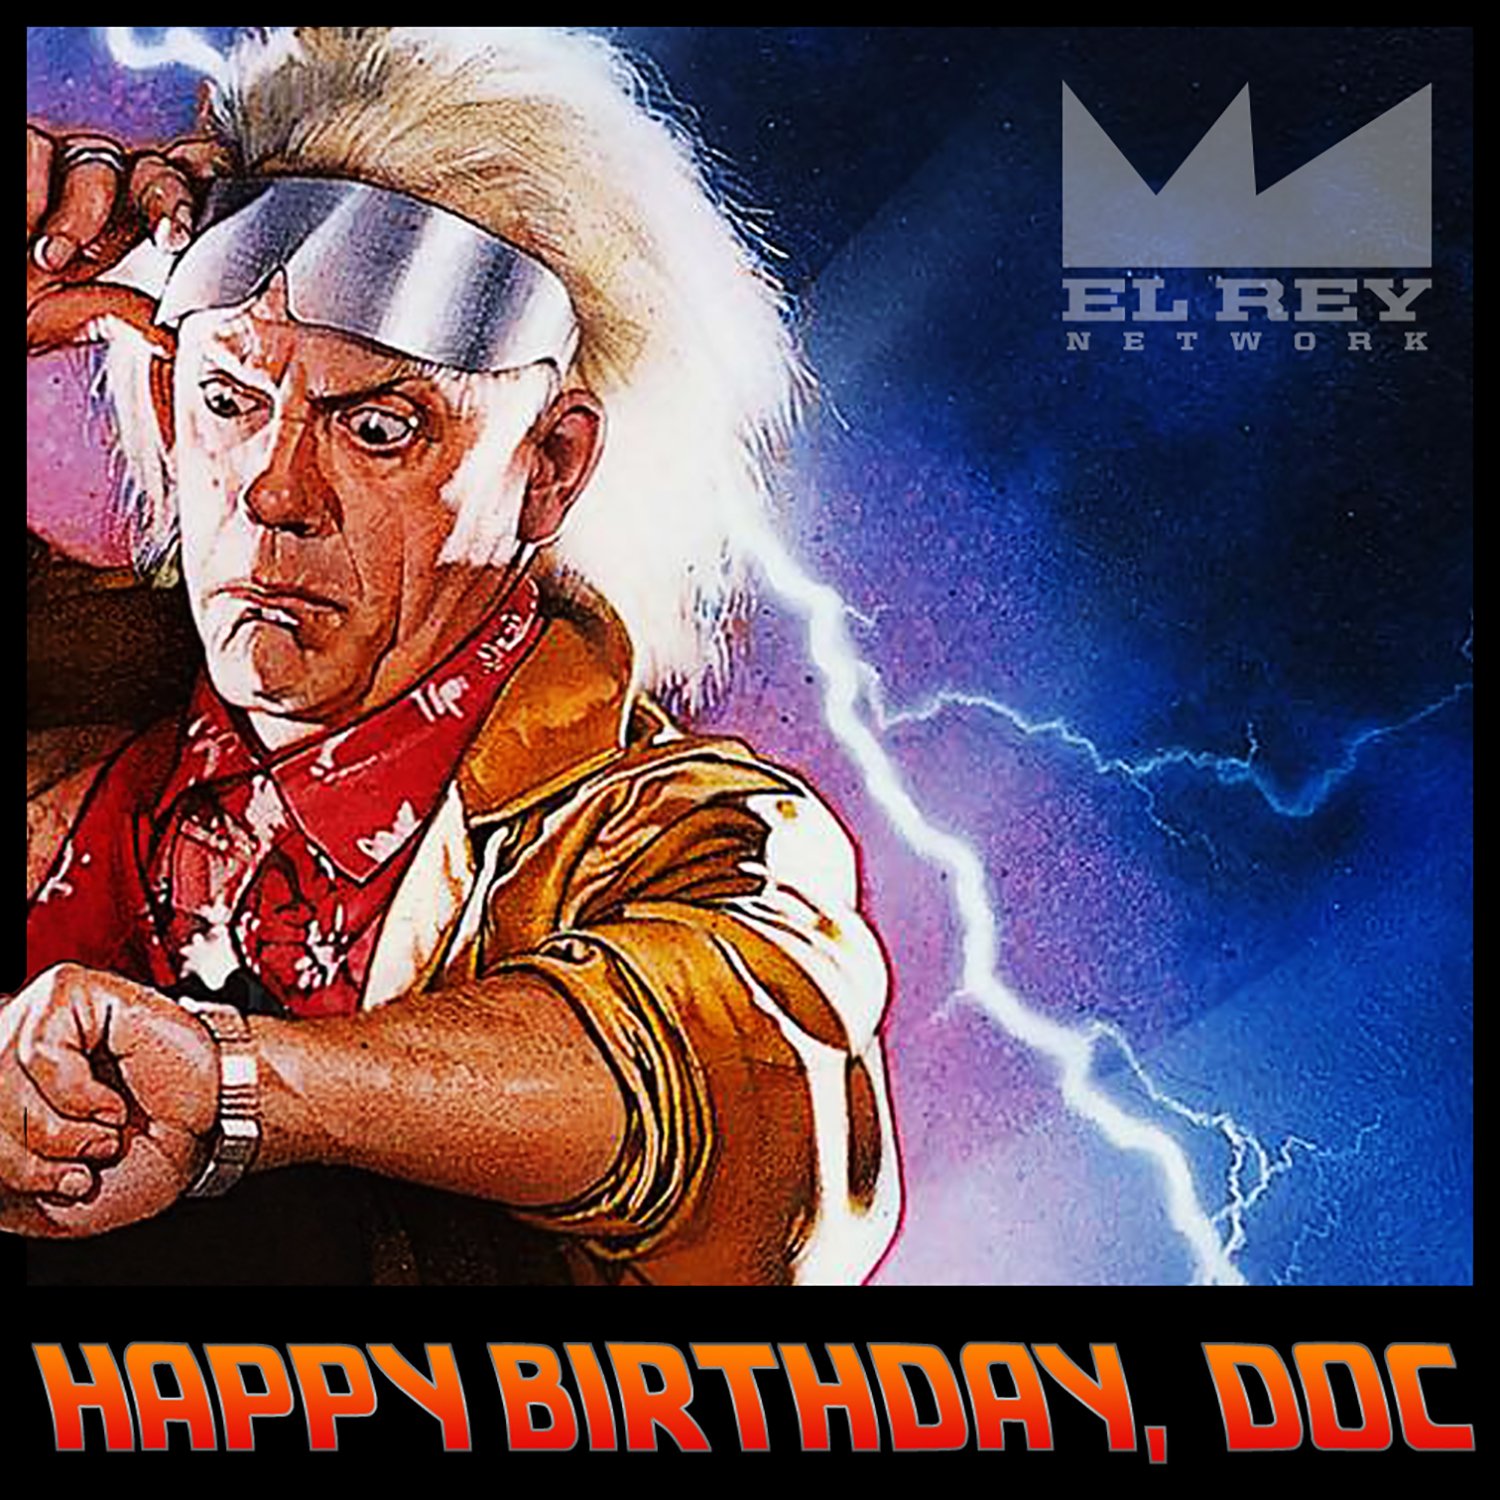 Doc Brown came back to the future just in time to celebrate. Happy birthday to Christopher Lloyd! 